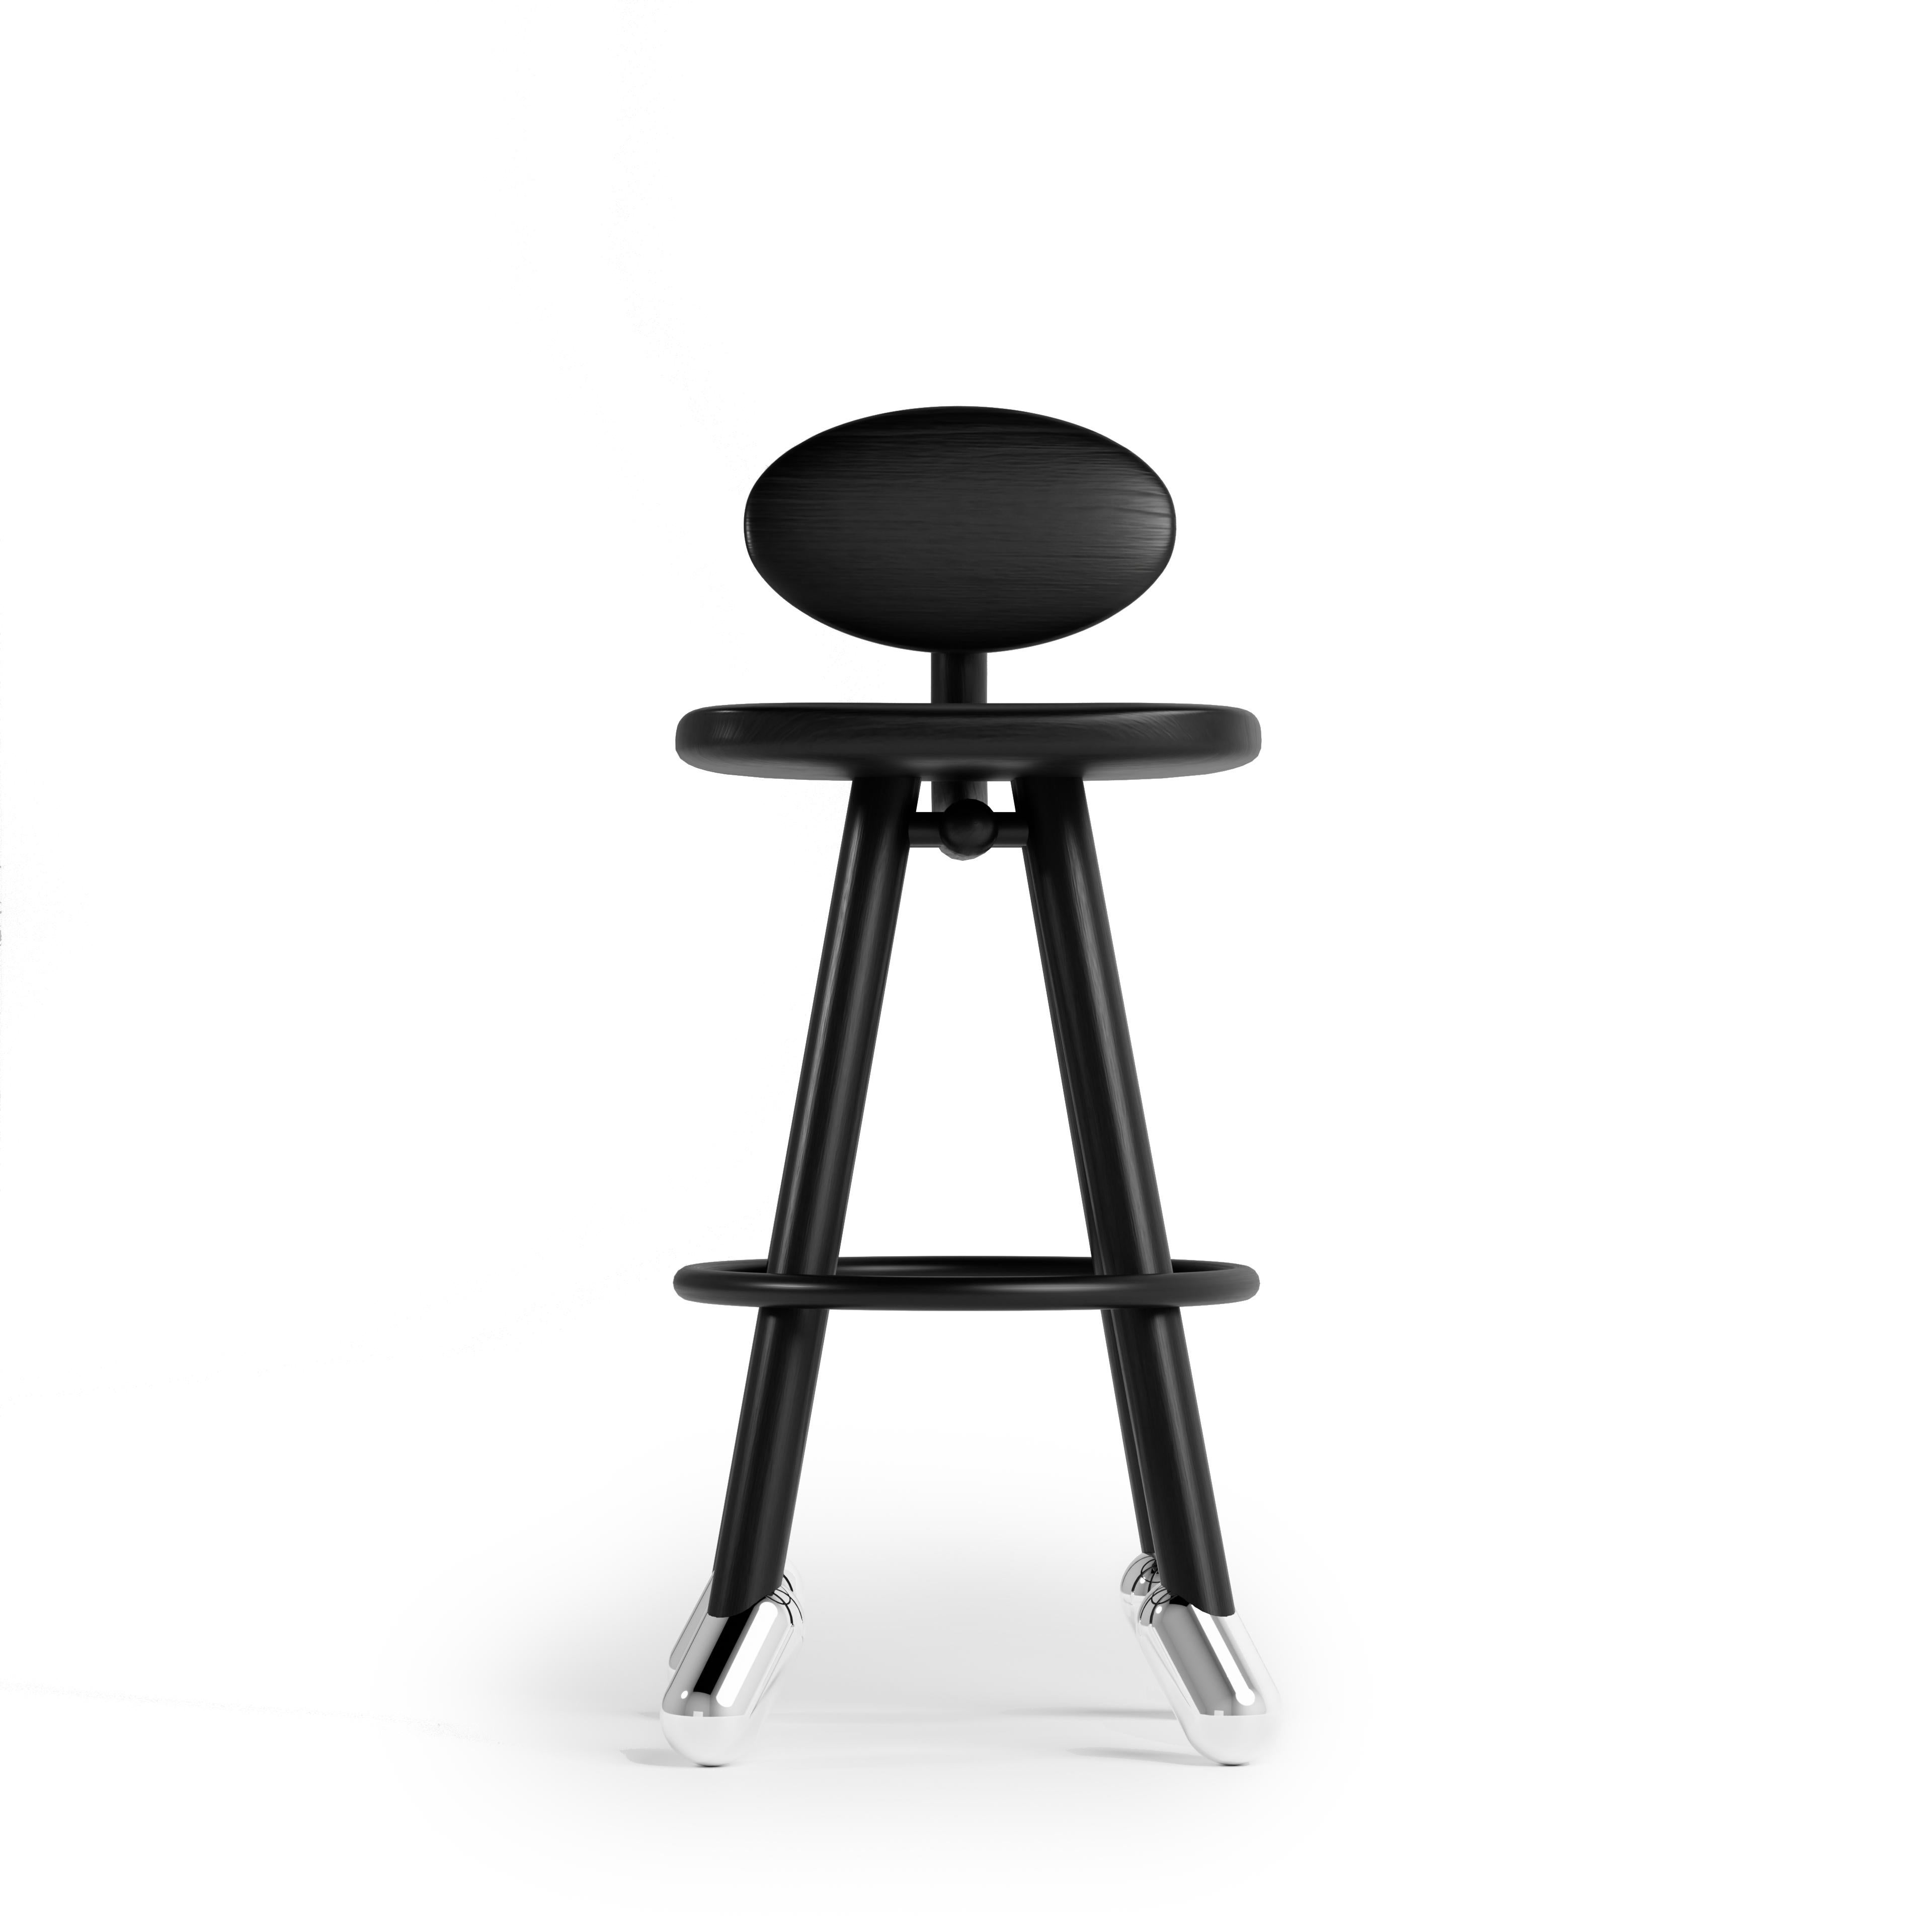 Tutu is not an ordinary stool. It was designed with a specific personality in mind, one that exudes elegance and grace. As a sister piece of the Walky Chair, Tutu was inspired by the figure of a ballerina.

We visualized that a stool that is tall